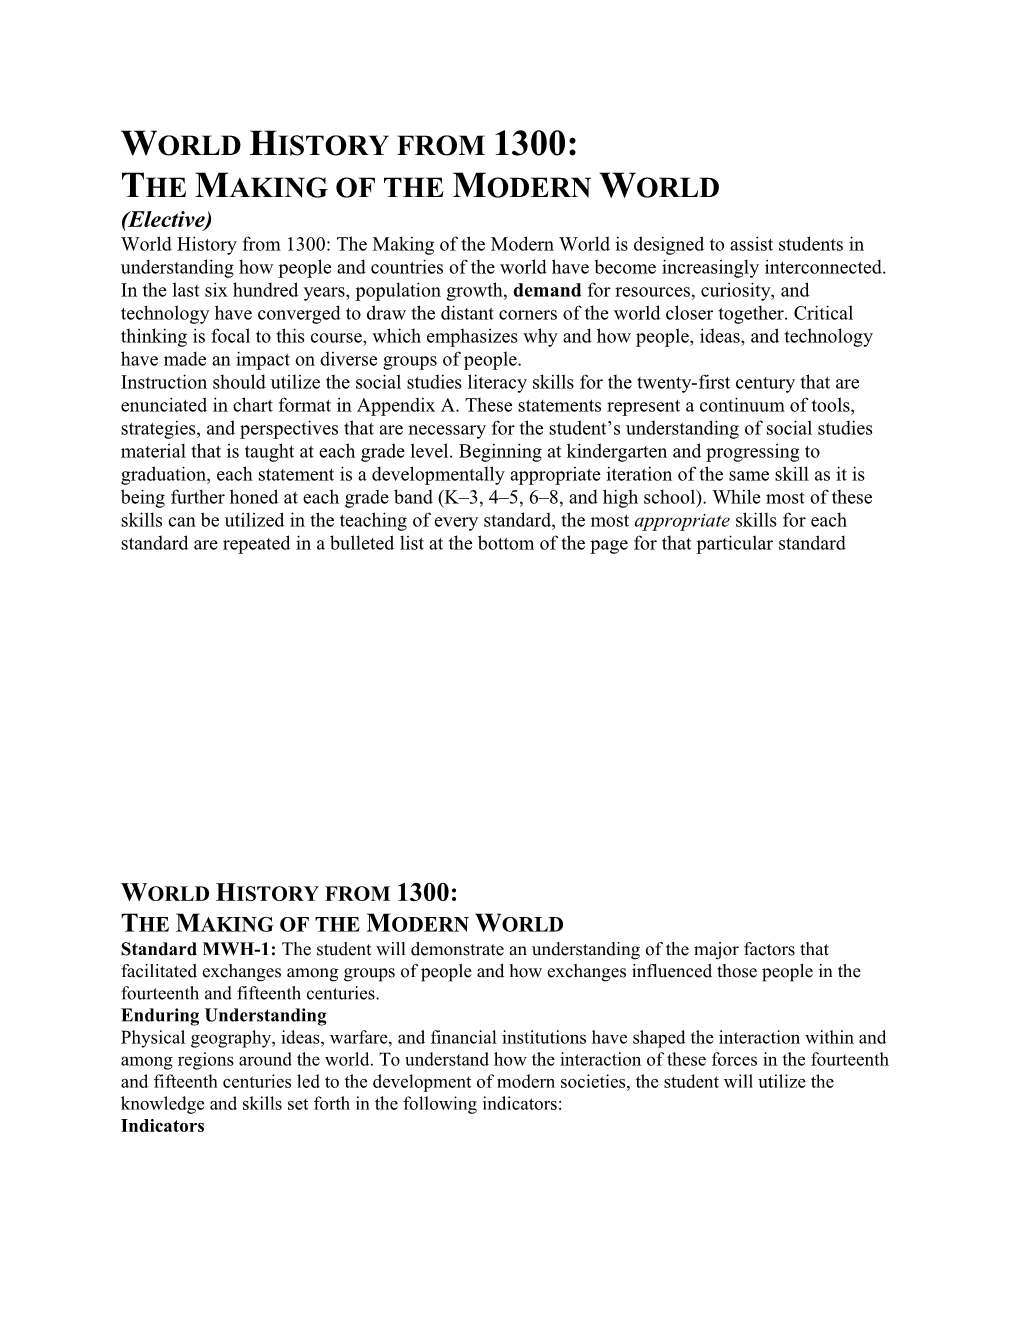 The Making of the Modern World